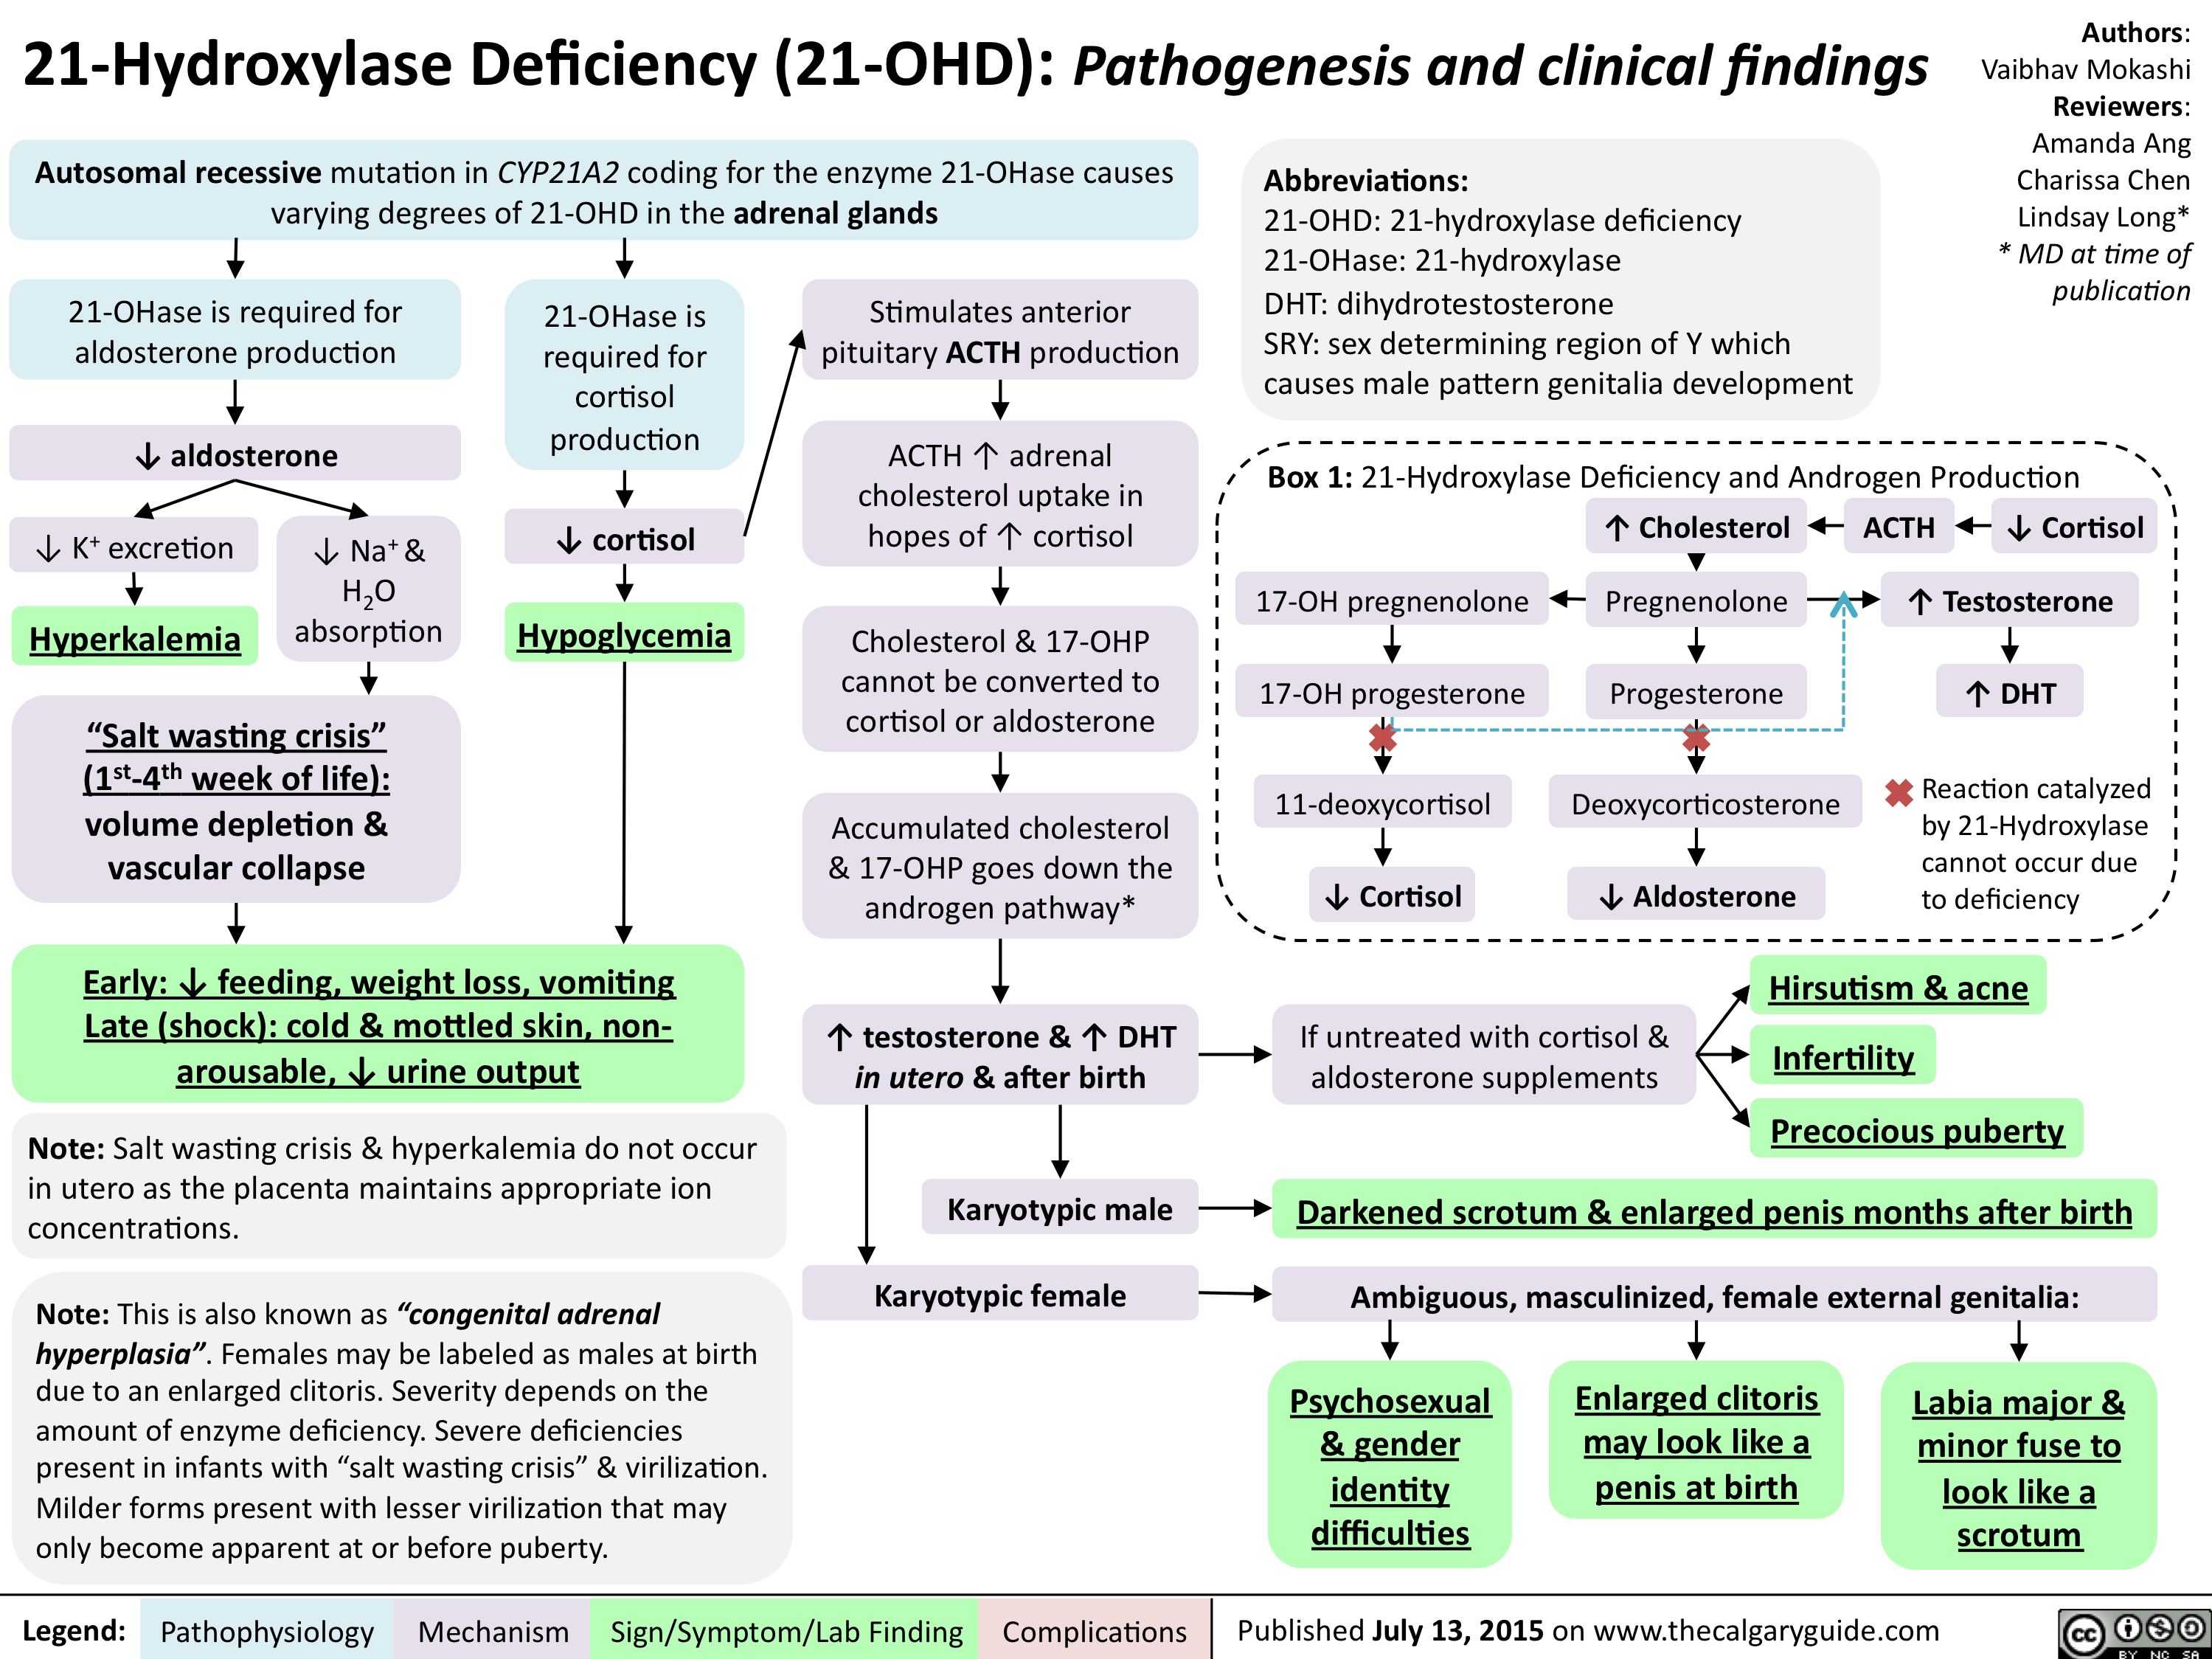 21-Hydroxylase Deficiency-Pathogenesis and clinical findings